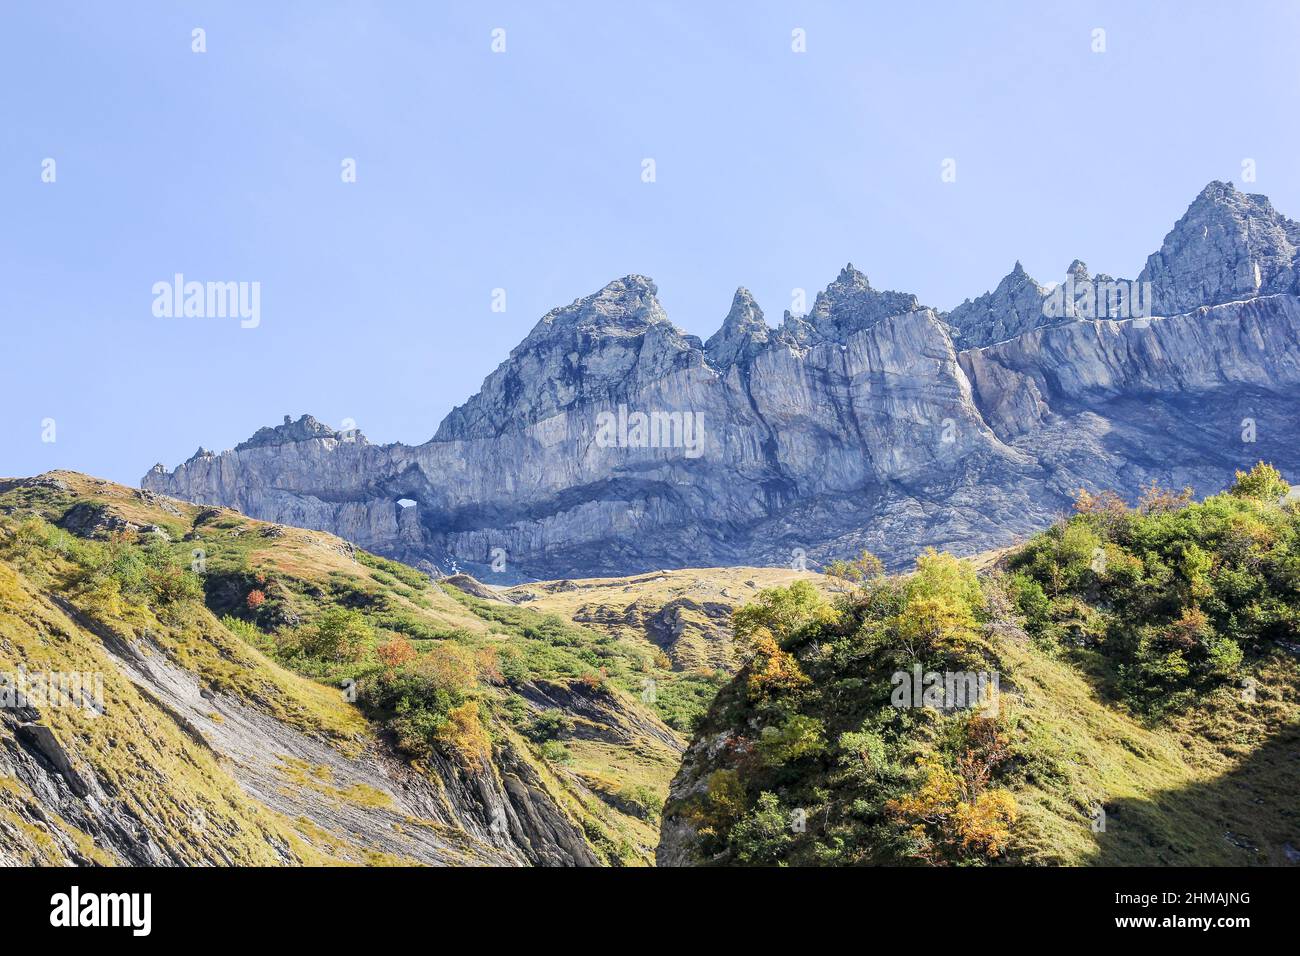 Martinsloch, Canton Glarus, Switzerland. It is a breakthrough in the Alpine chain of the Tschingelhoerner s in the form of a triangle about 6 meters w Stock Photo